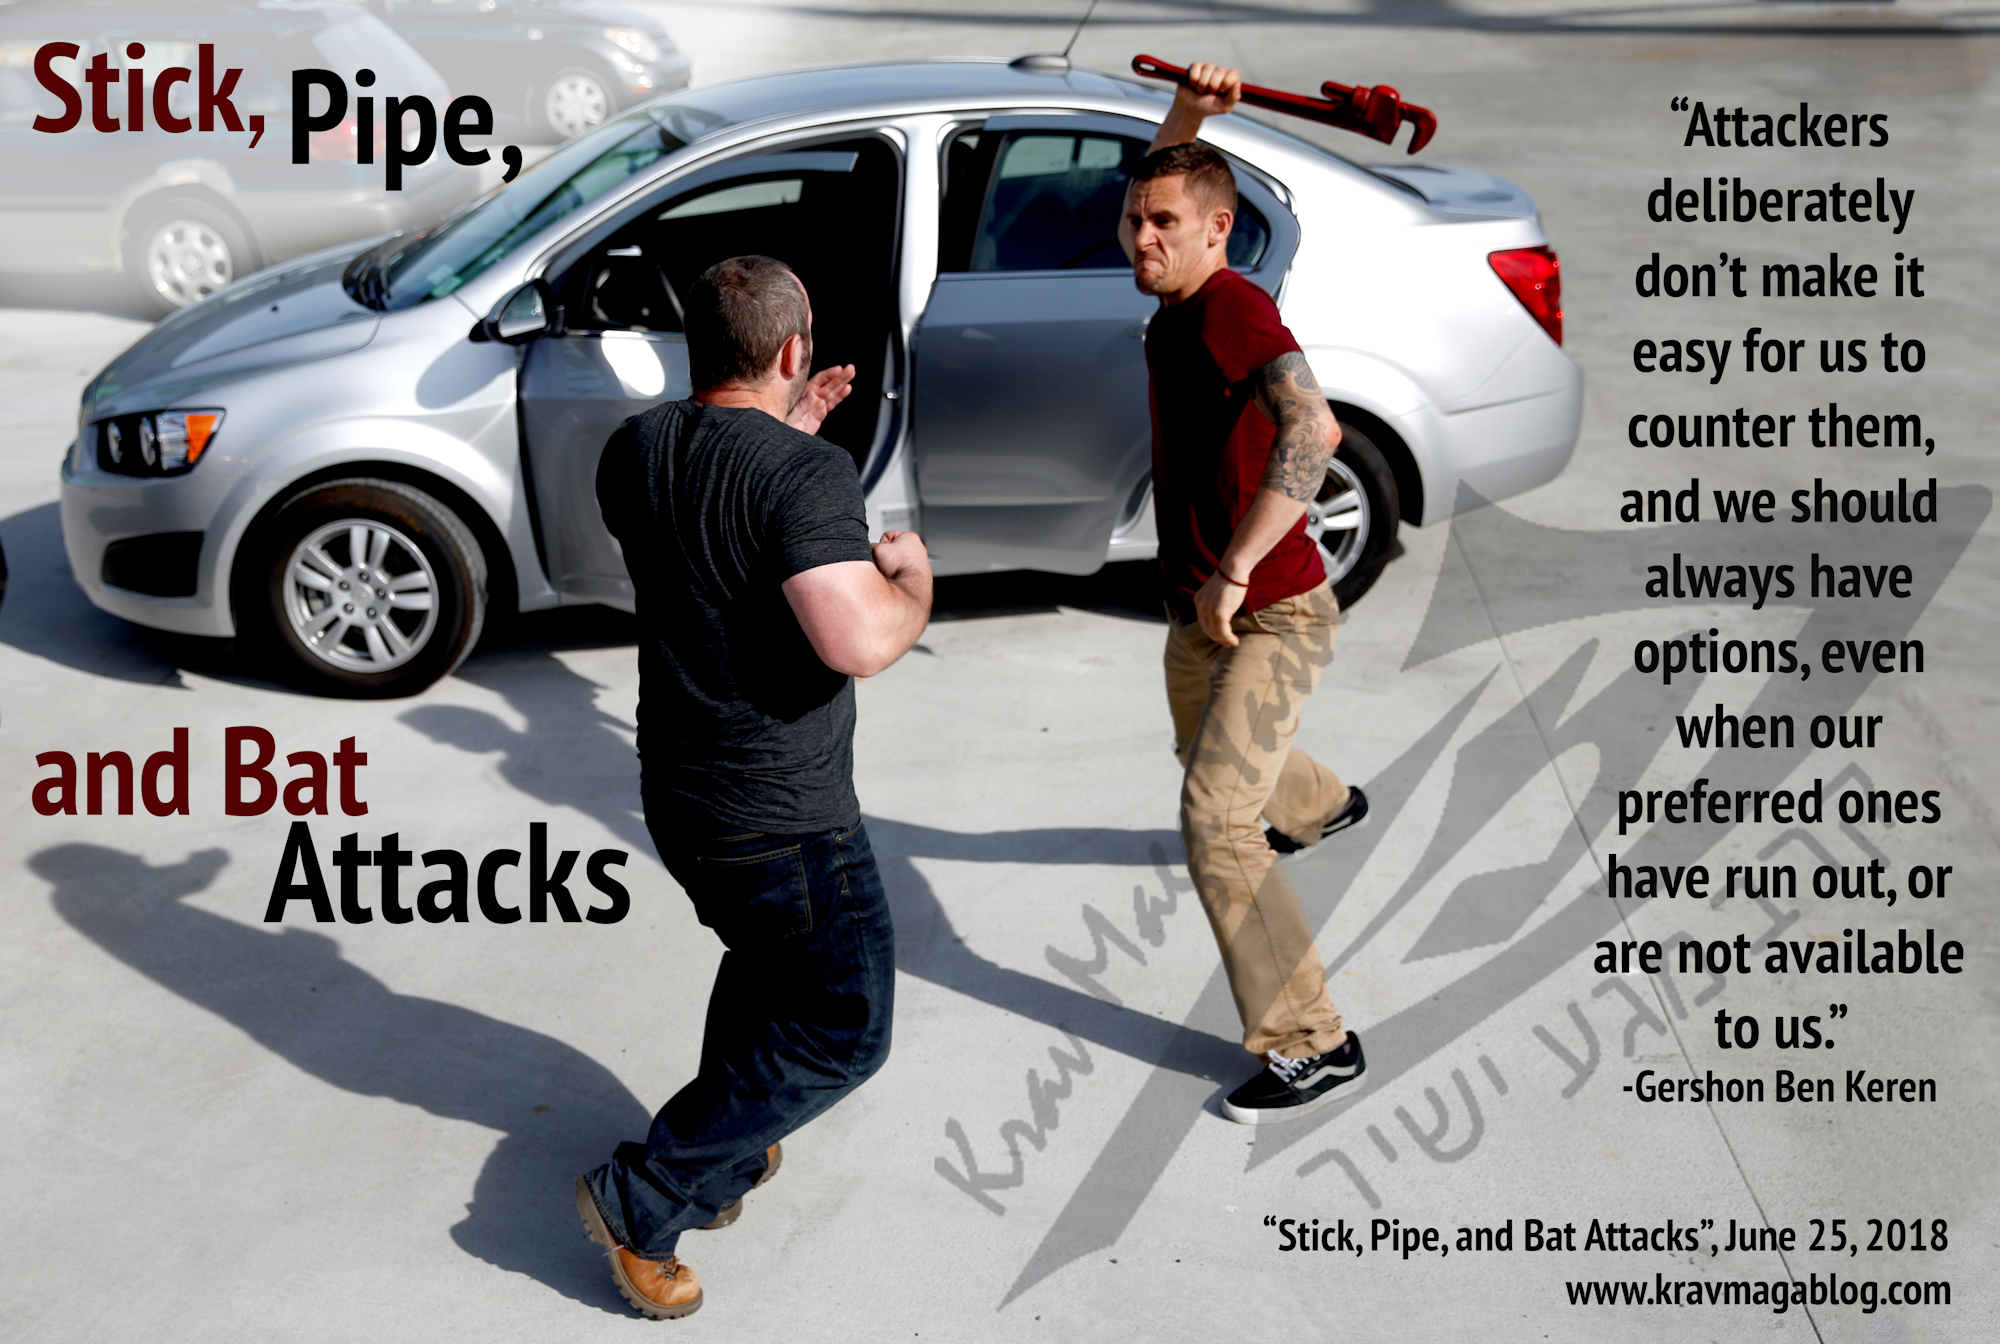 Blog About Stick, Pipe and Bat Attacks